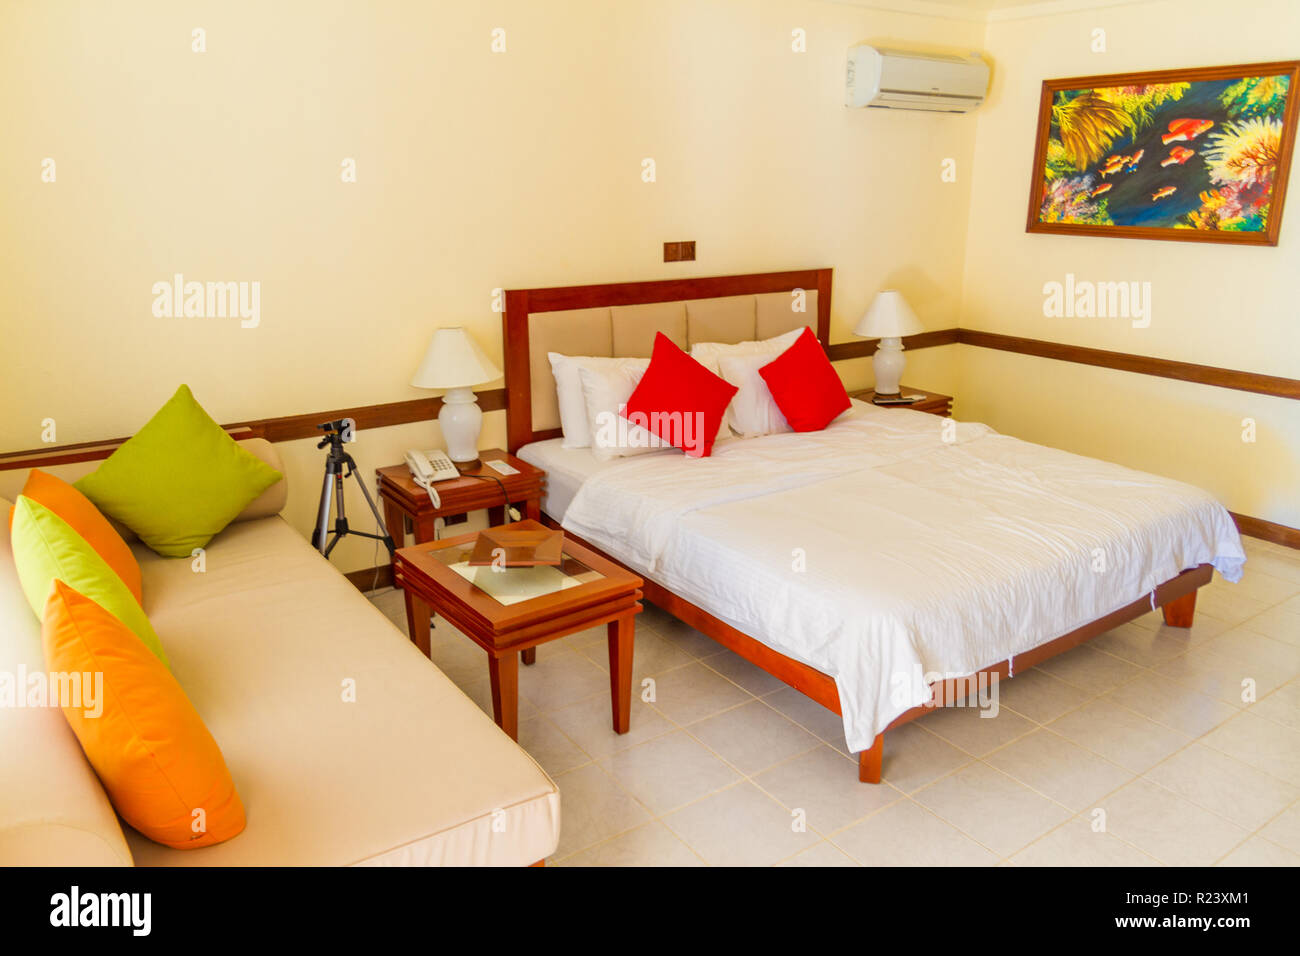 3 star modern room of a hotel Stock Photo